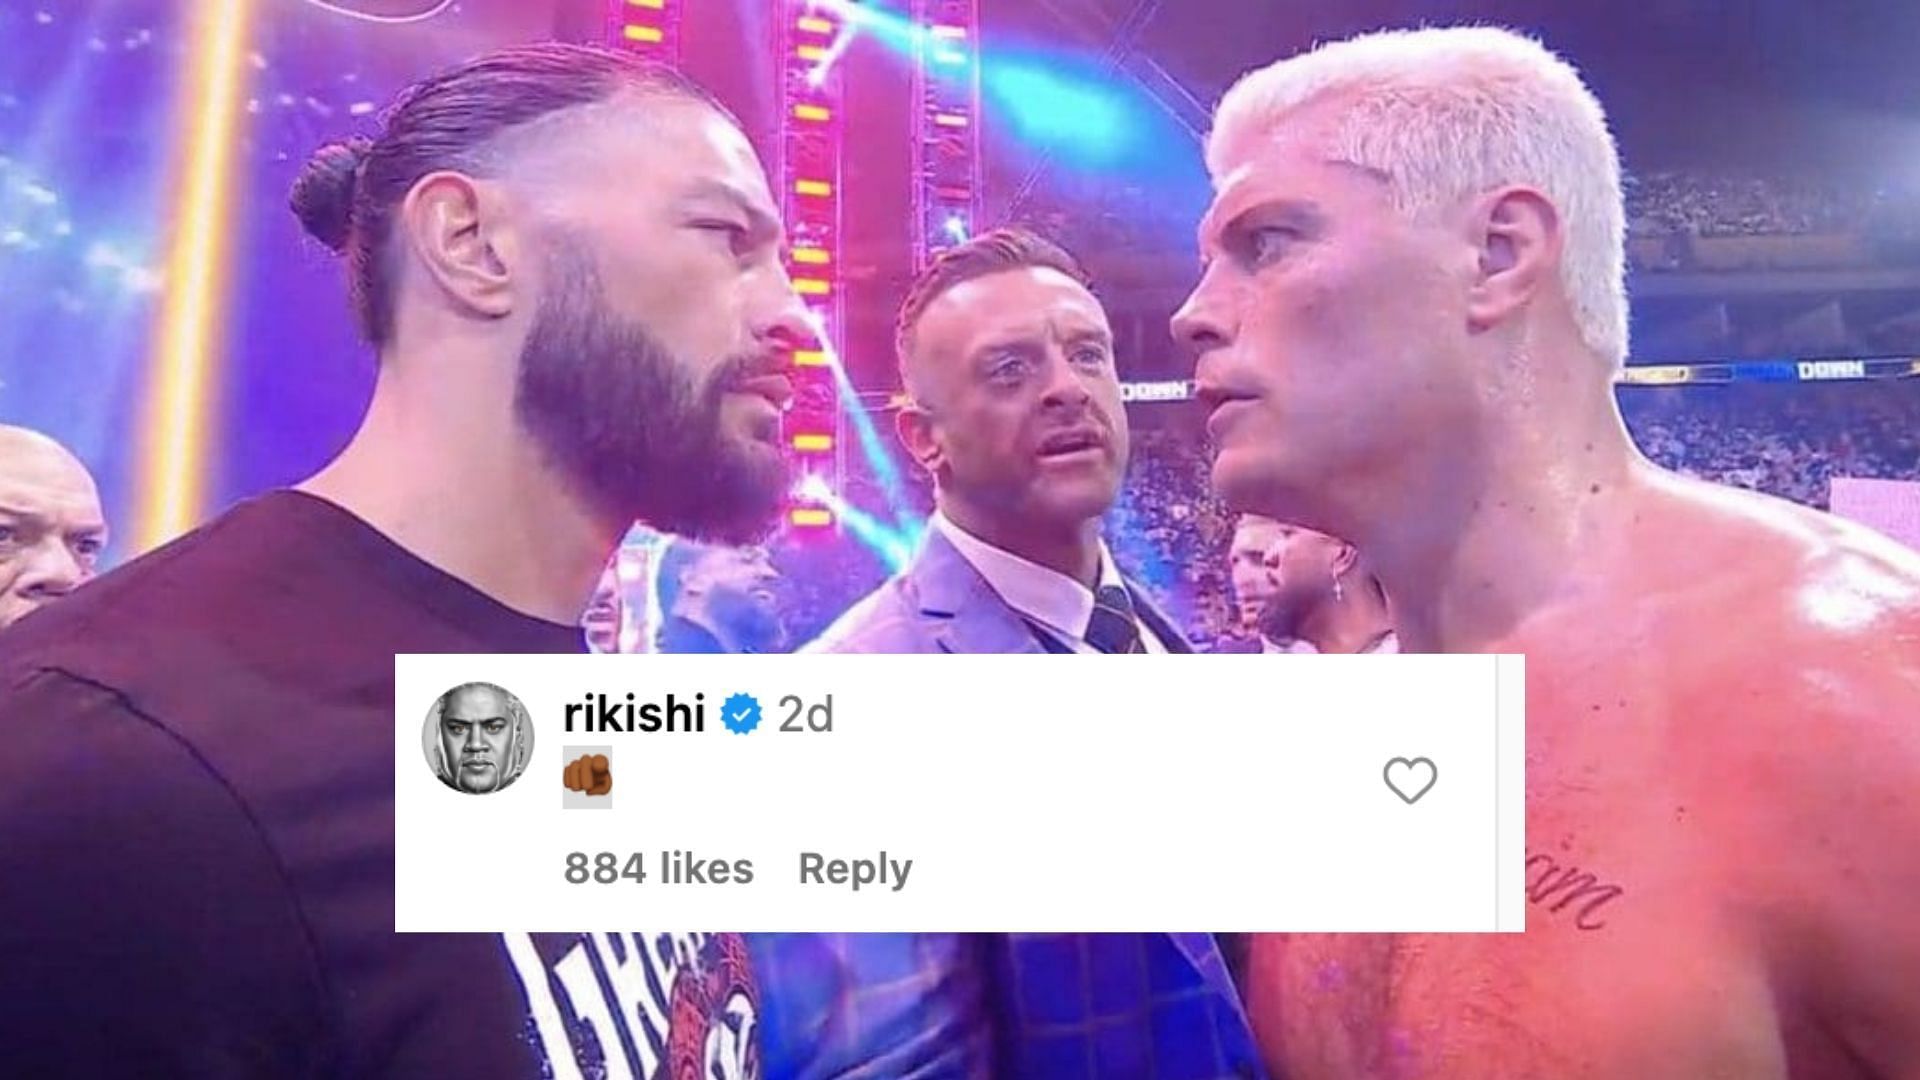 Rikishi reacts to confrontation between Reigns and Rhodes on Instagram.